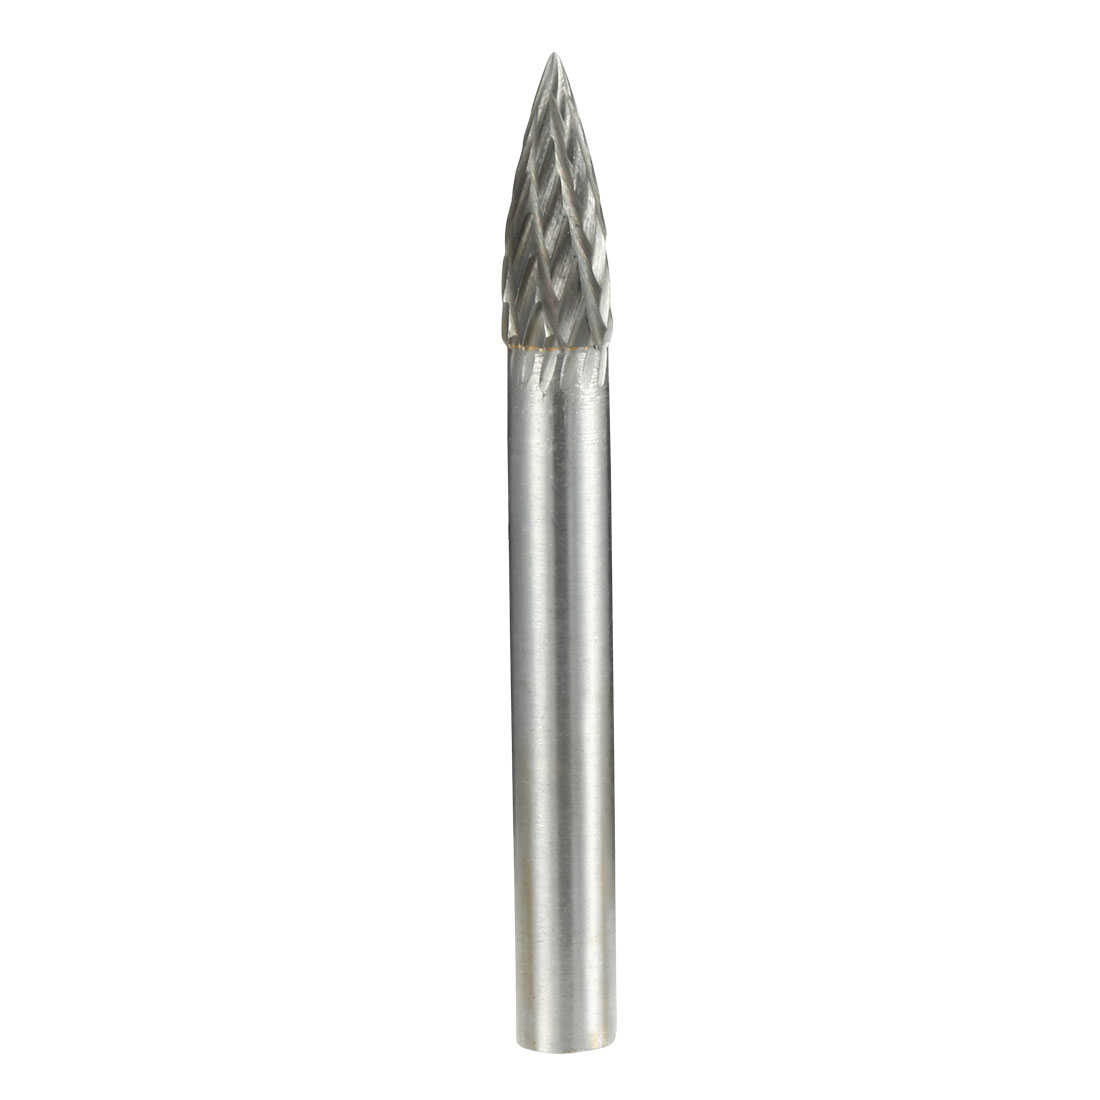 Double Cut Tungsten Carbide Rotary File 6mm Head 6mm Shank Pointed Tree Shape